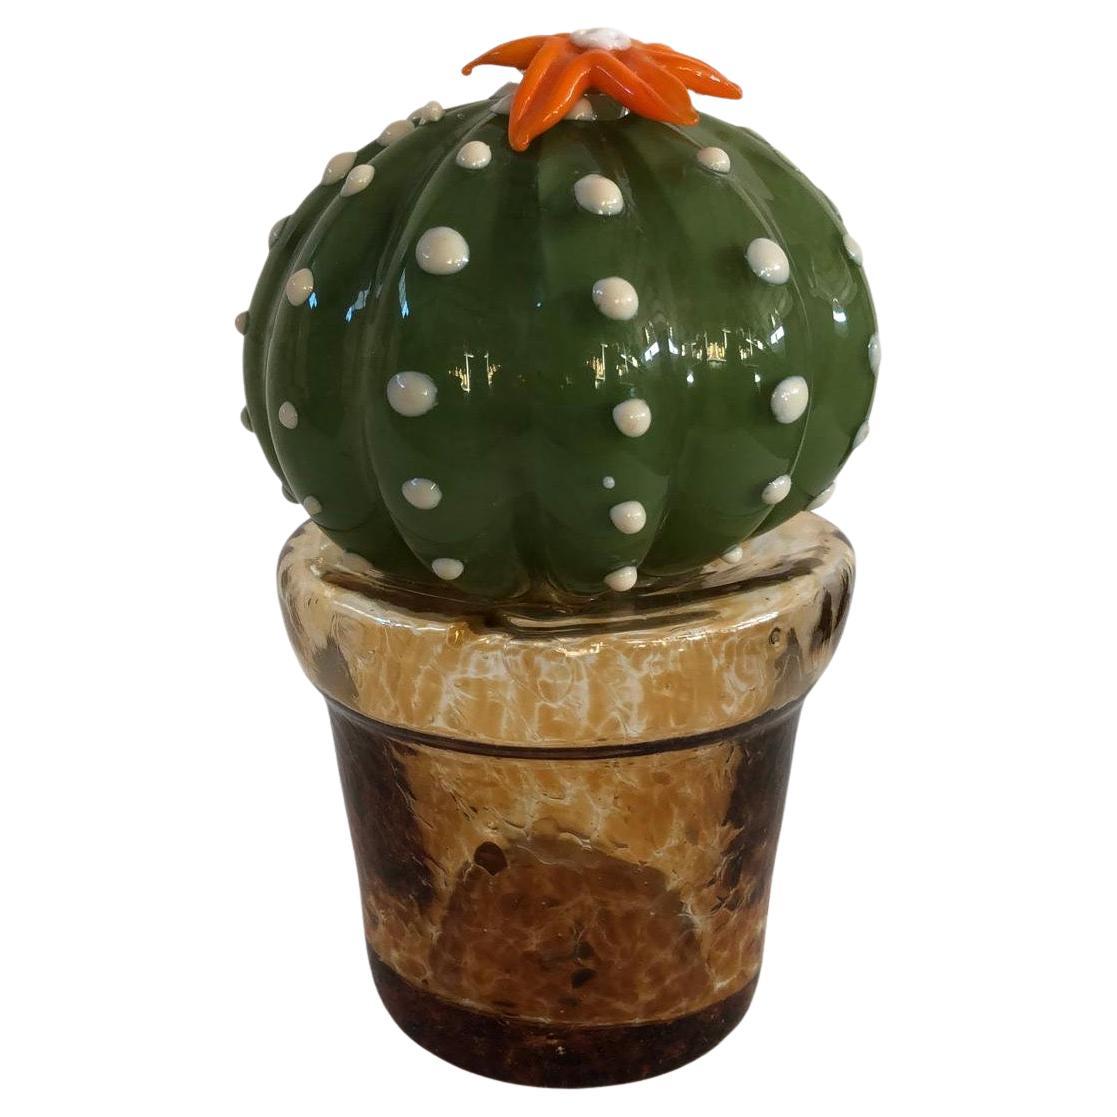 Murano Art Glass Green and Orange Cactus Plant, 1990 For Sale